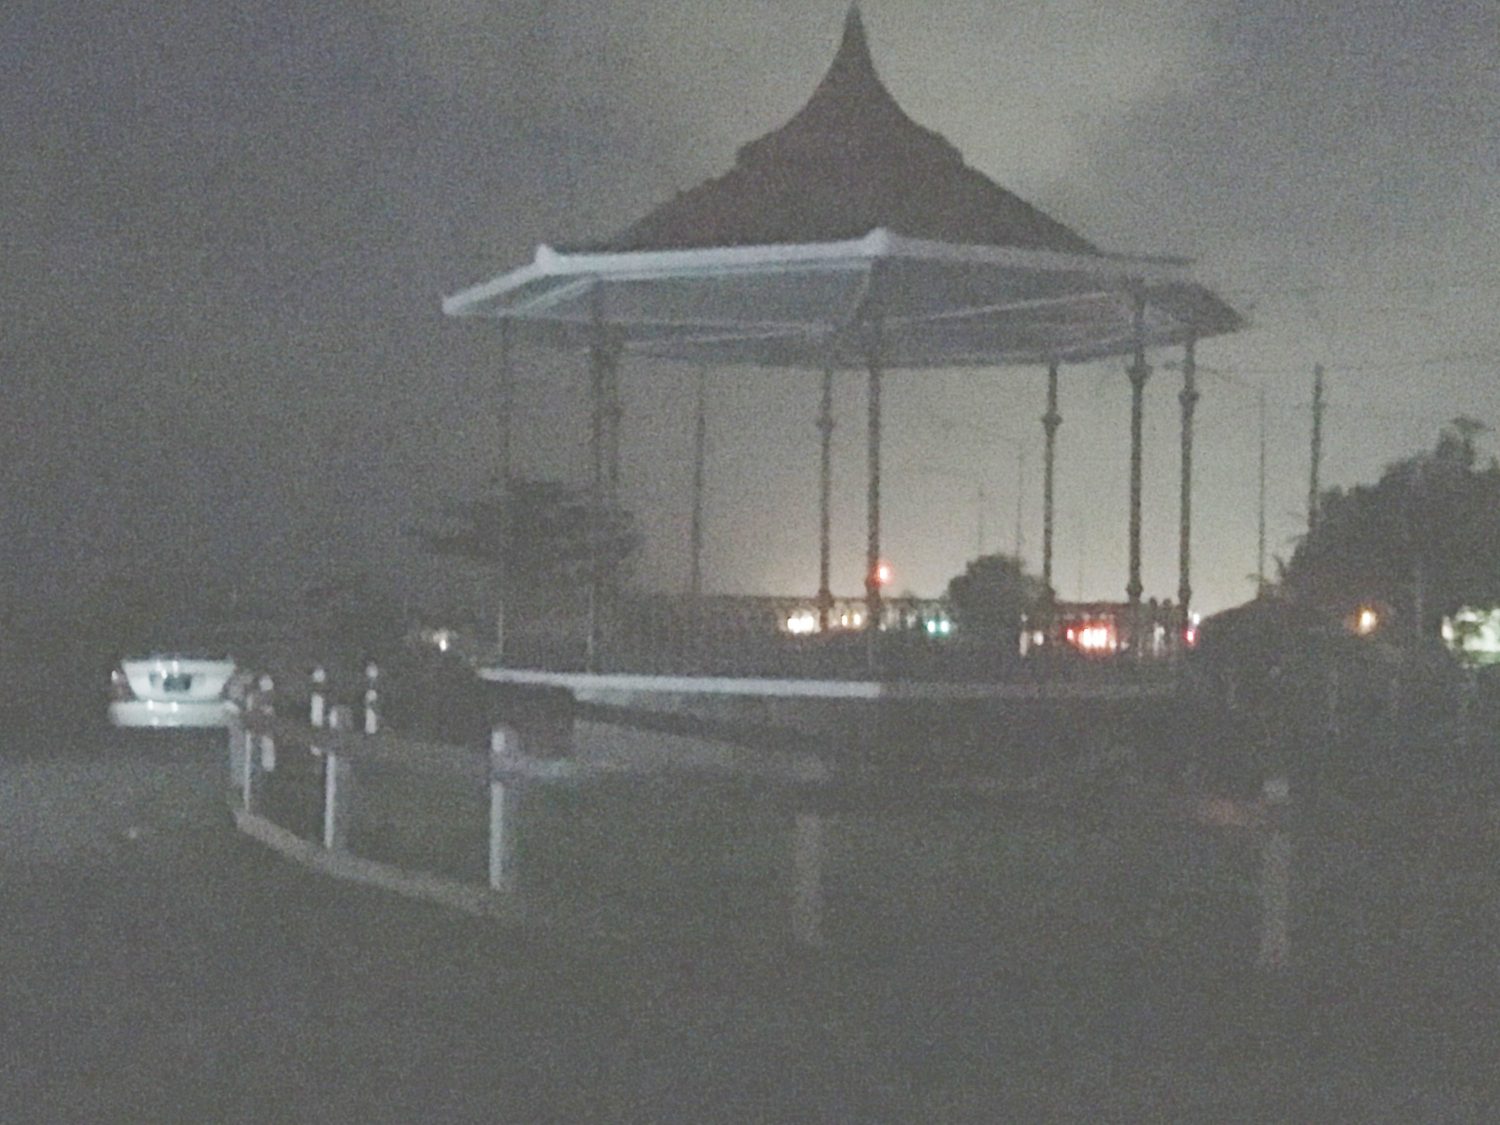 The Kingston seawall bandstand in total darkness last Thursday night
